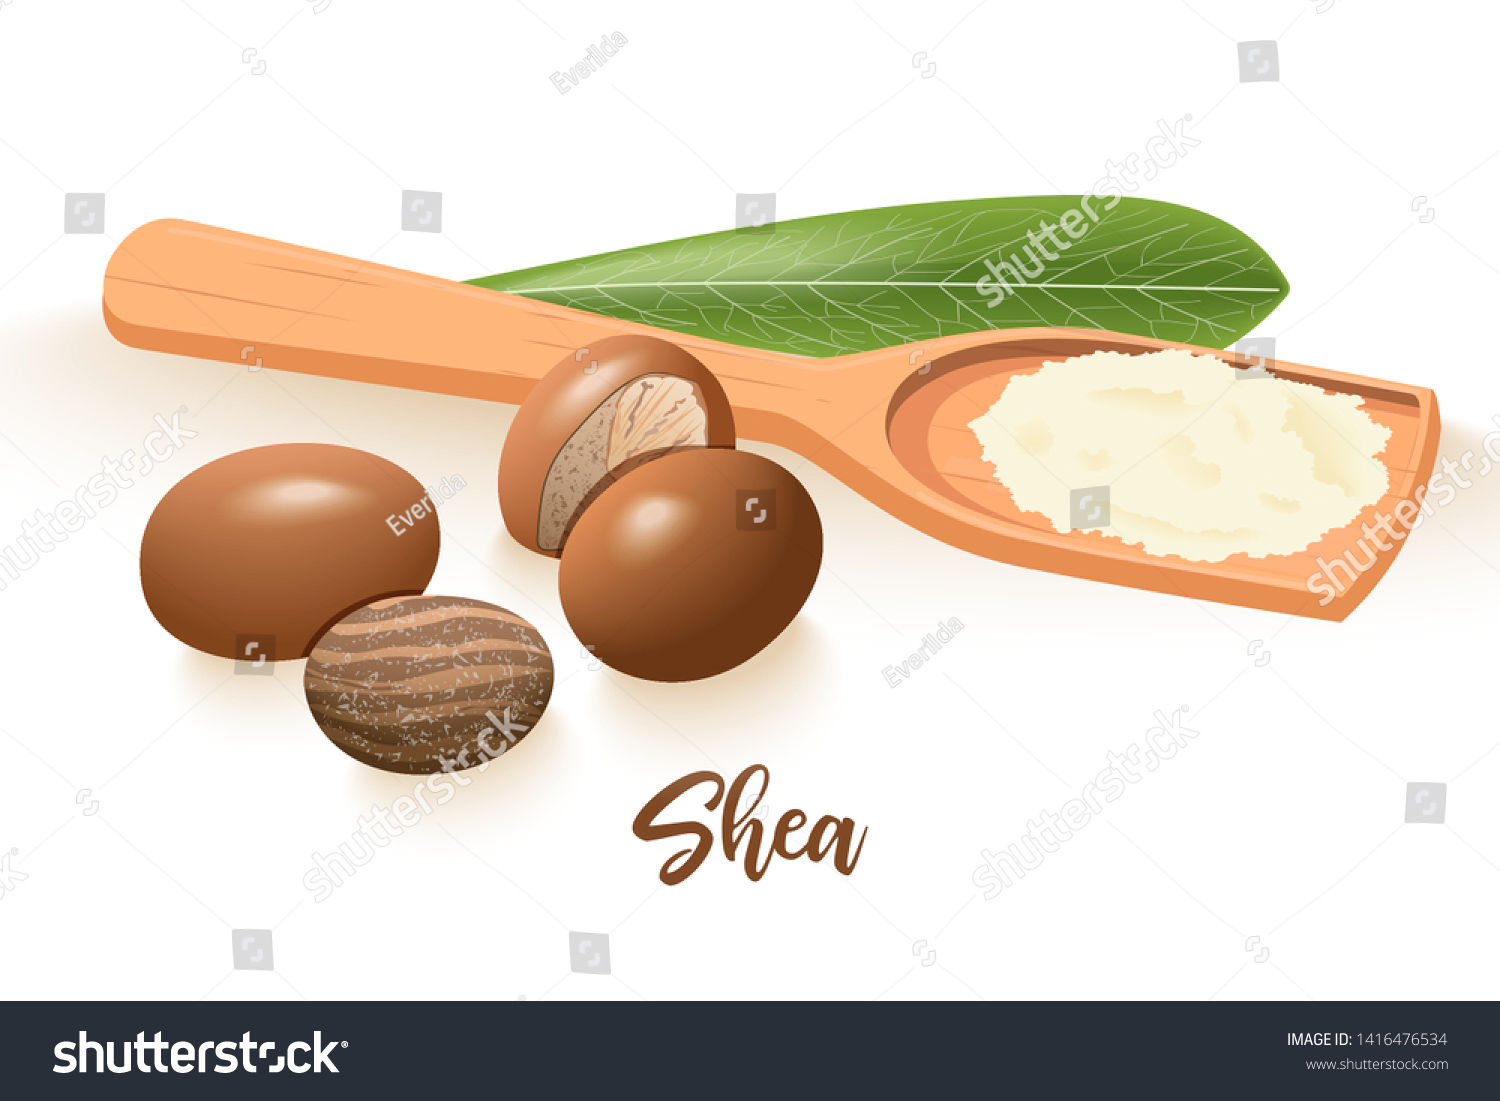 SVG of Ripe shea nuts and leaf. shi tree pods whole and cracked. Vitellaria paradoxa. Card template copy space. Oilplant for cooking, cosmetics, aromatherapy, perfume, food, healthcare, ointments, oil prints svg